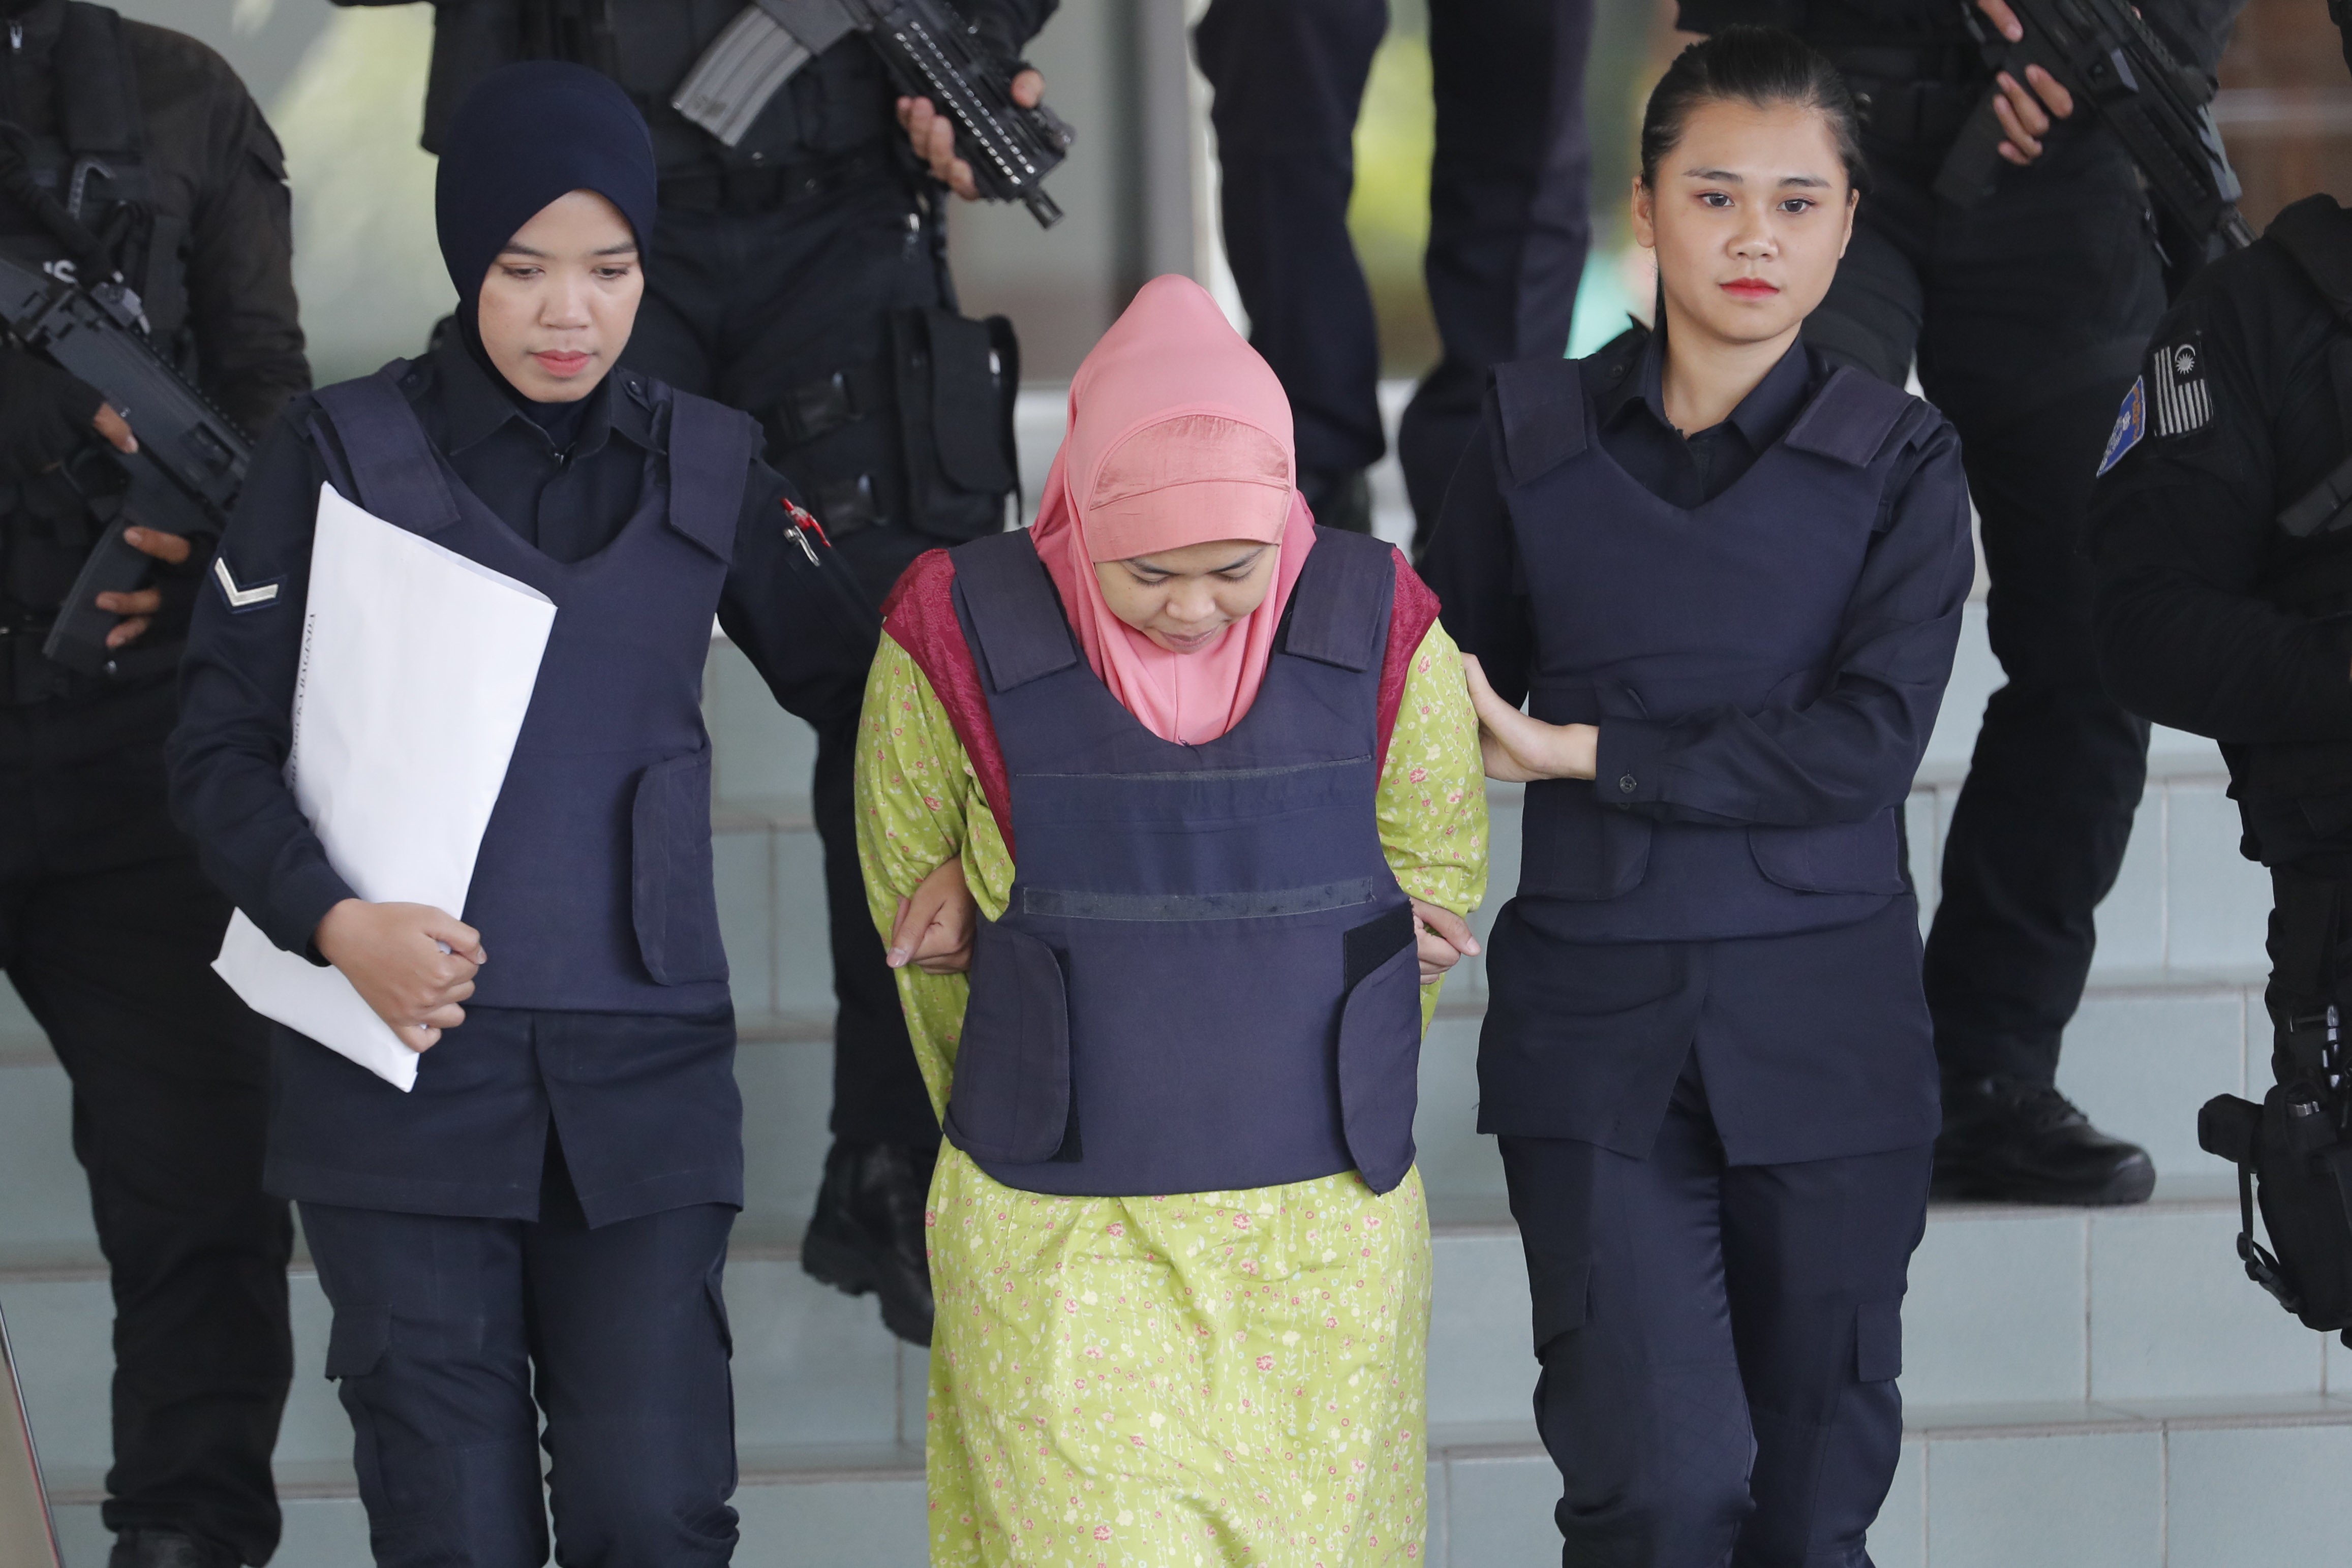 Siti Aisyah is escorted from court by Malaysian police. Photo: AP